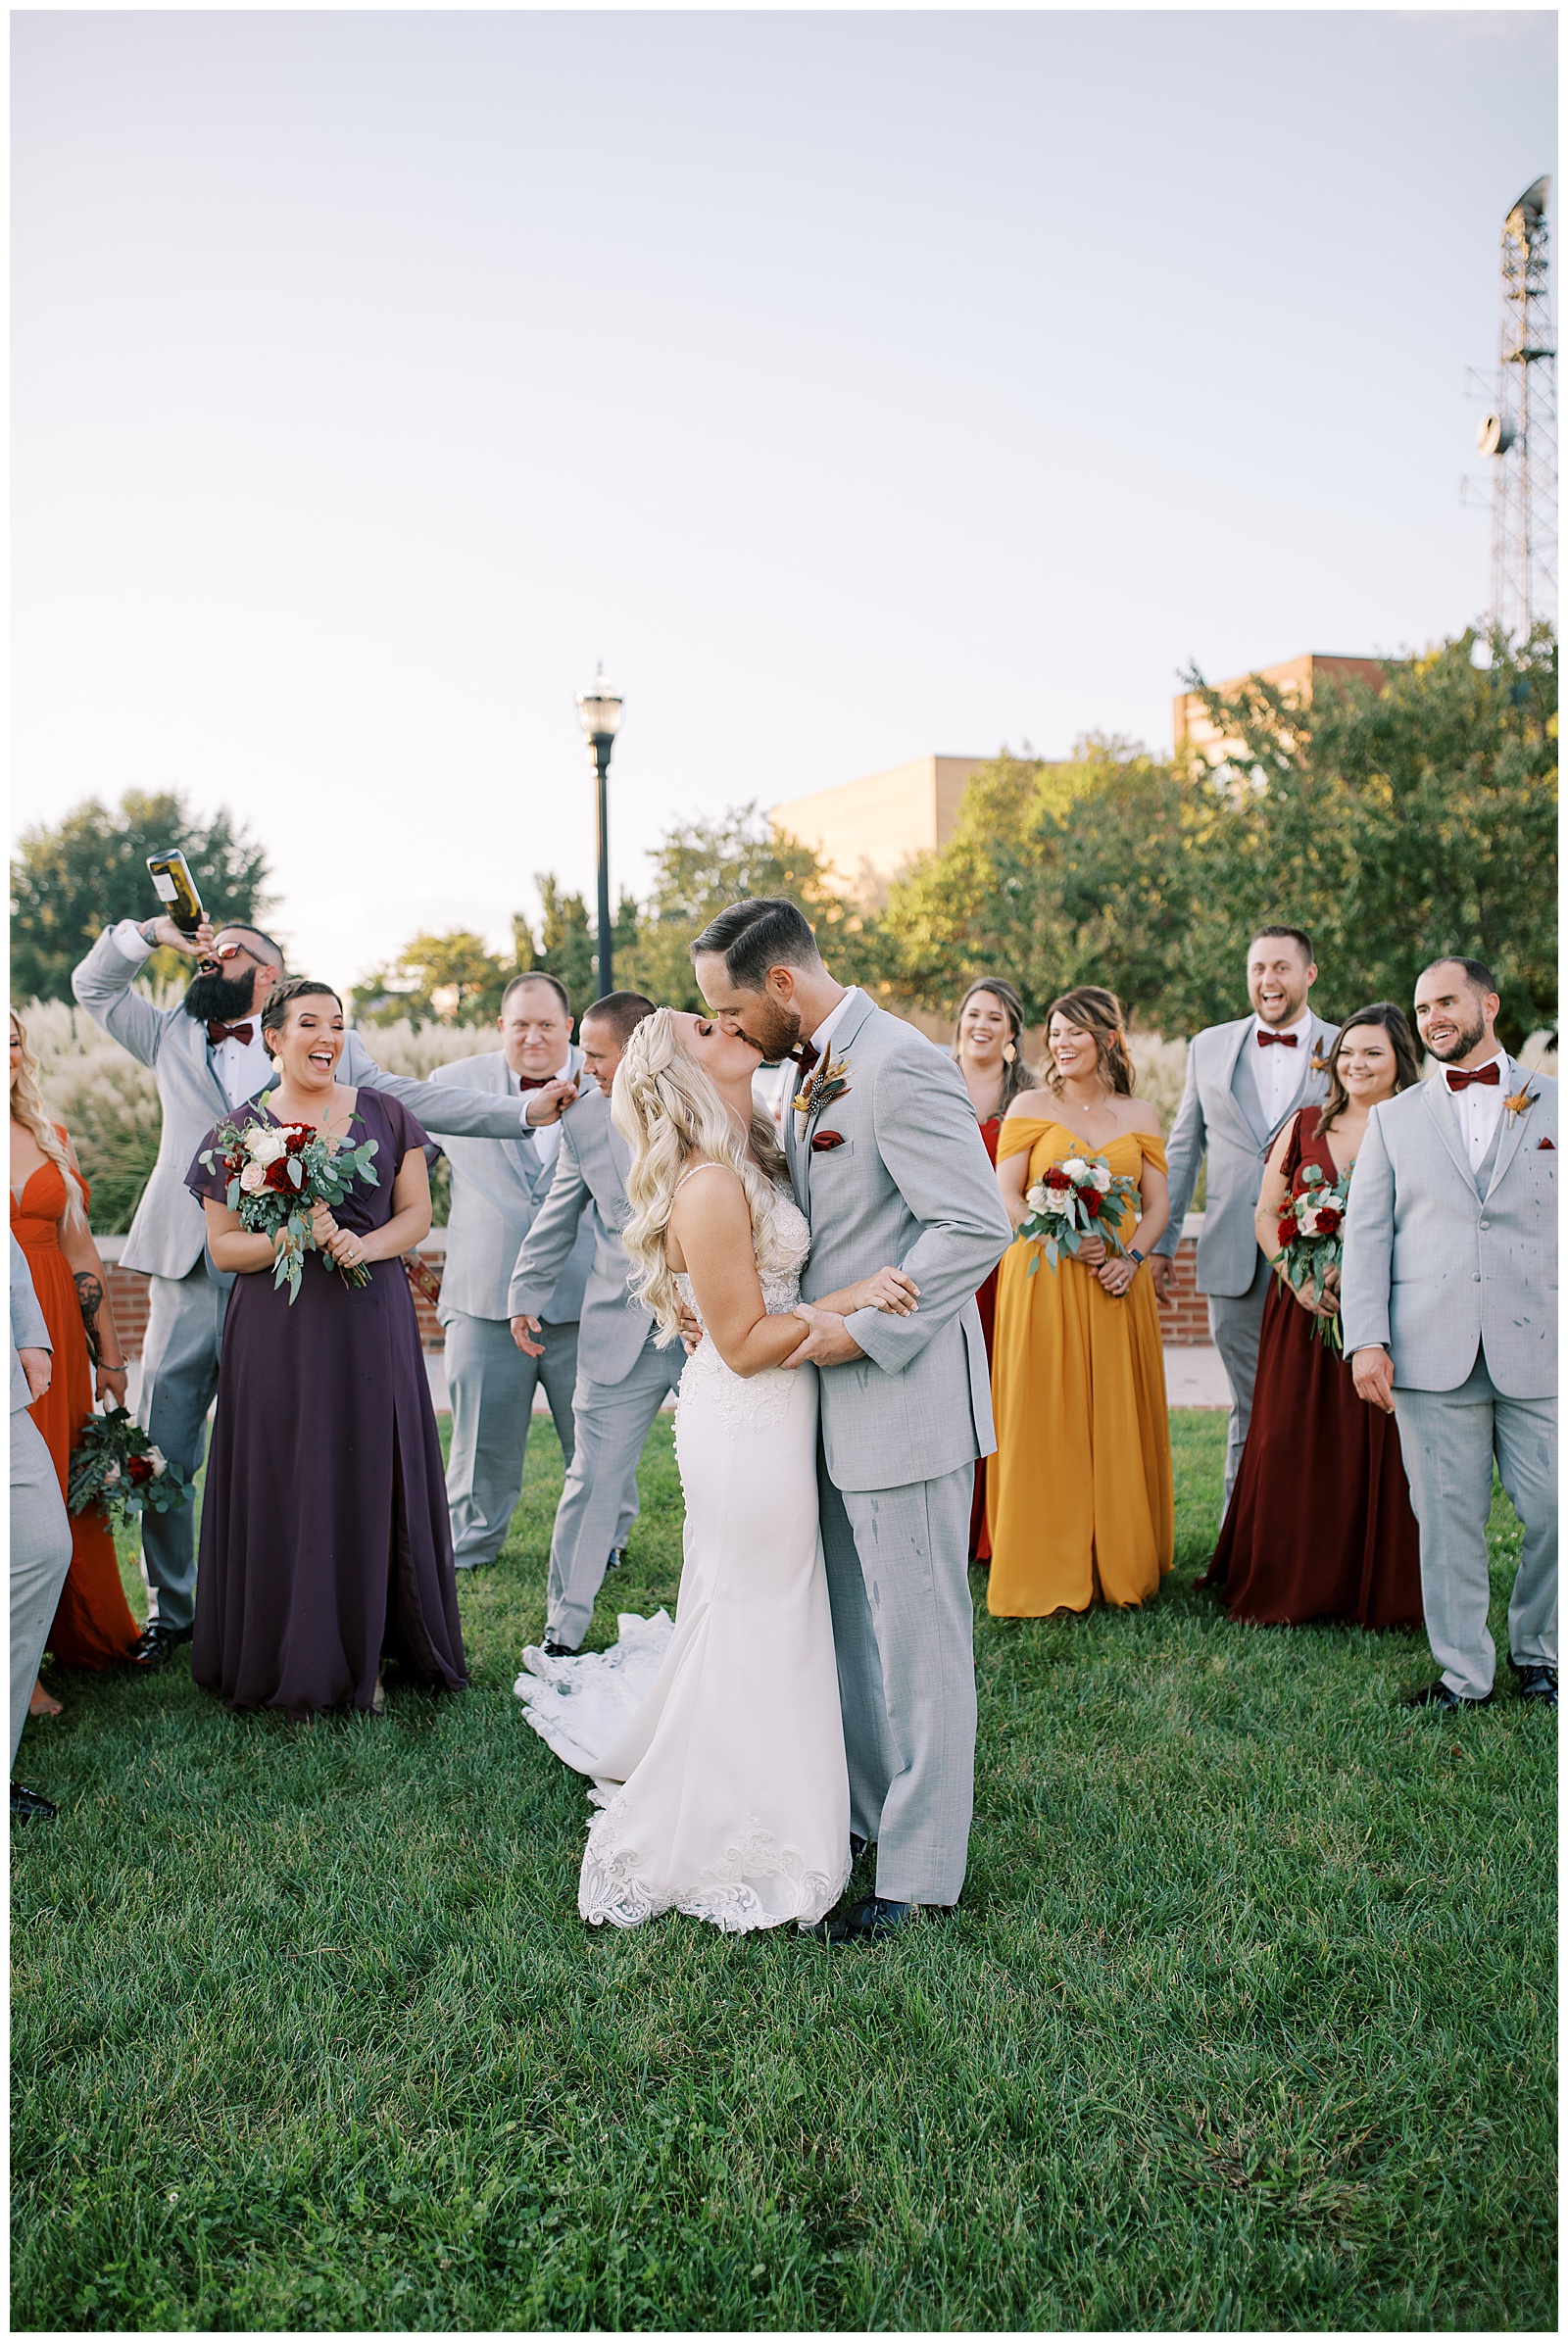 A bride and groom in wedding attire stand in front of a group of wedding party whilst they cheer them on and kiss in front of The Social venue in Kingsport Tennessee